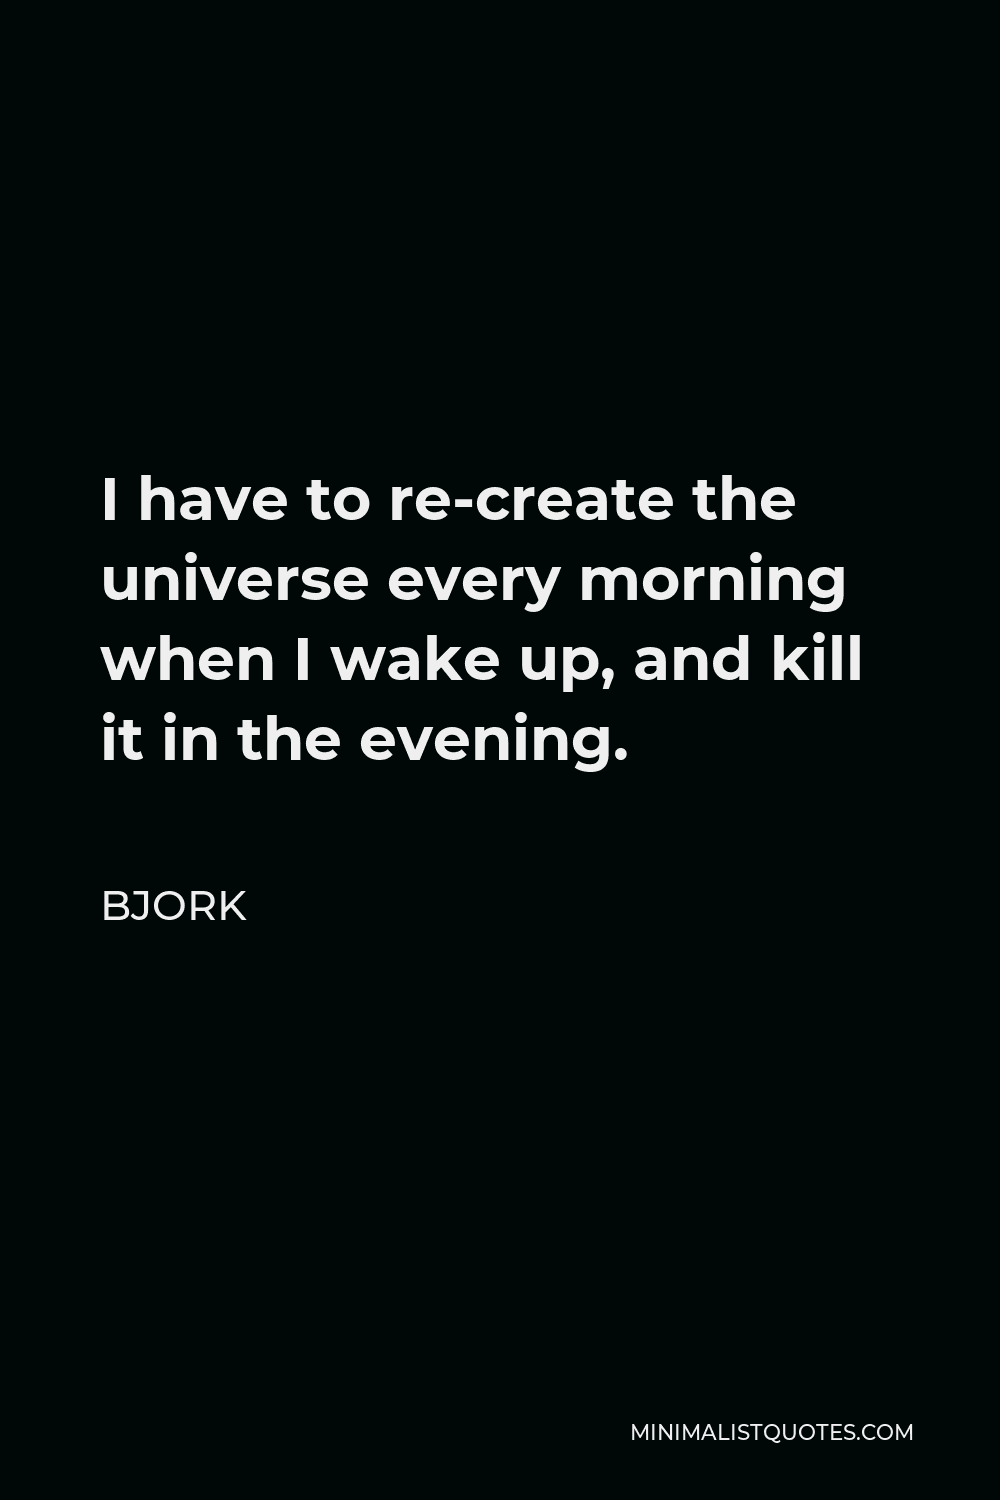 Bjork Quote - I have to re-create the universe every morning when I wake up, and kill it in the evening.